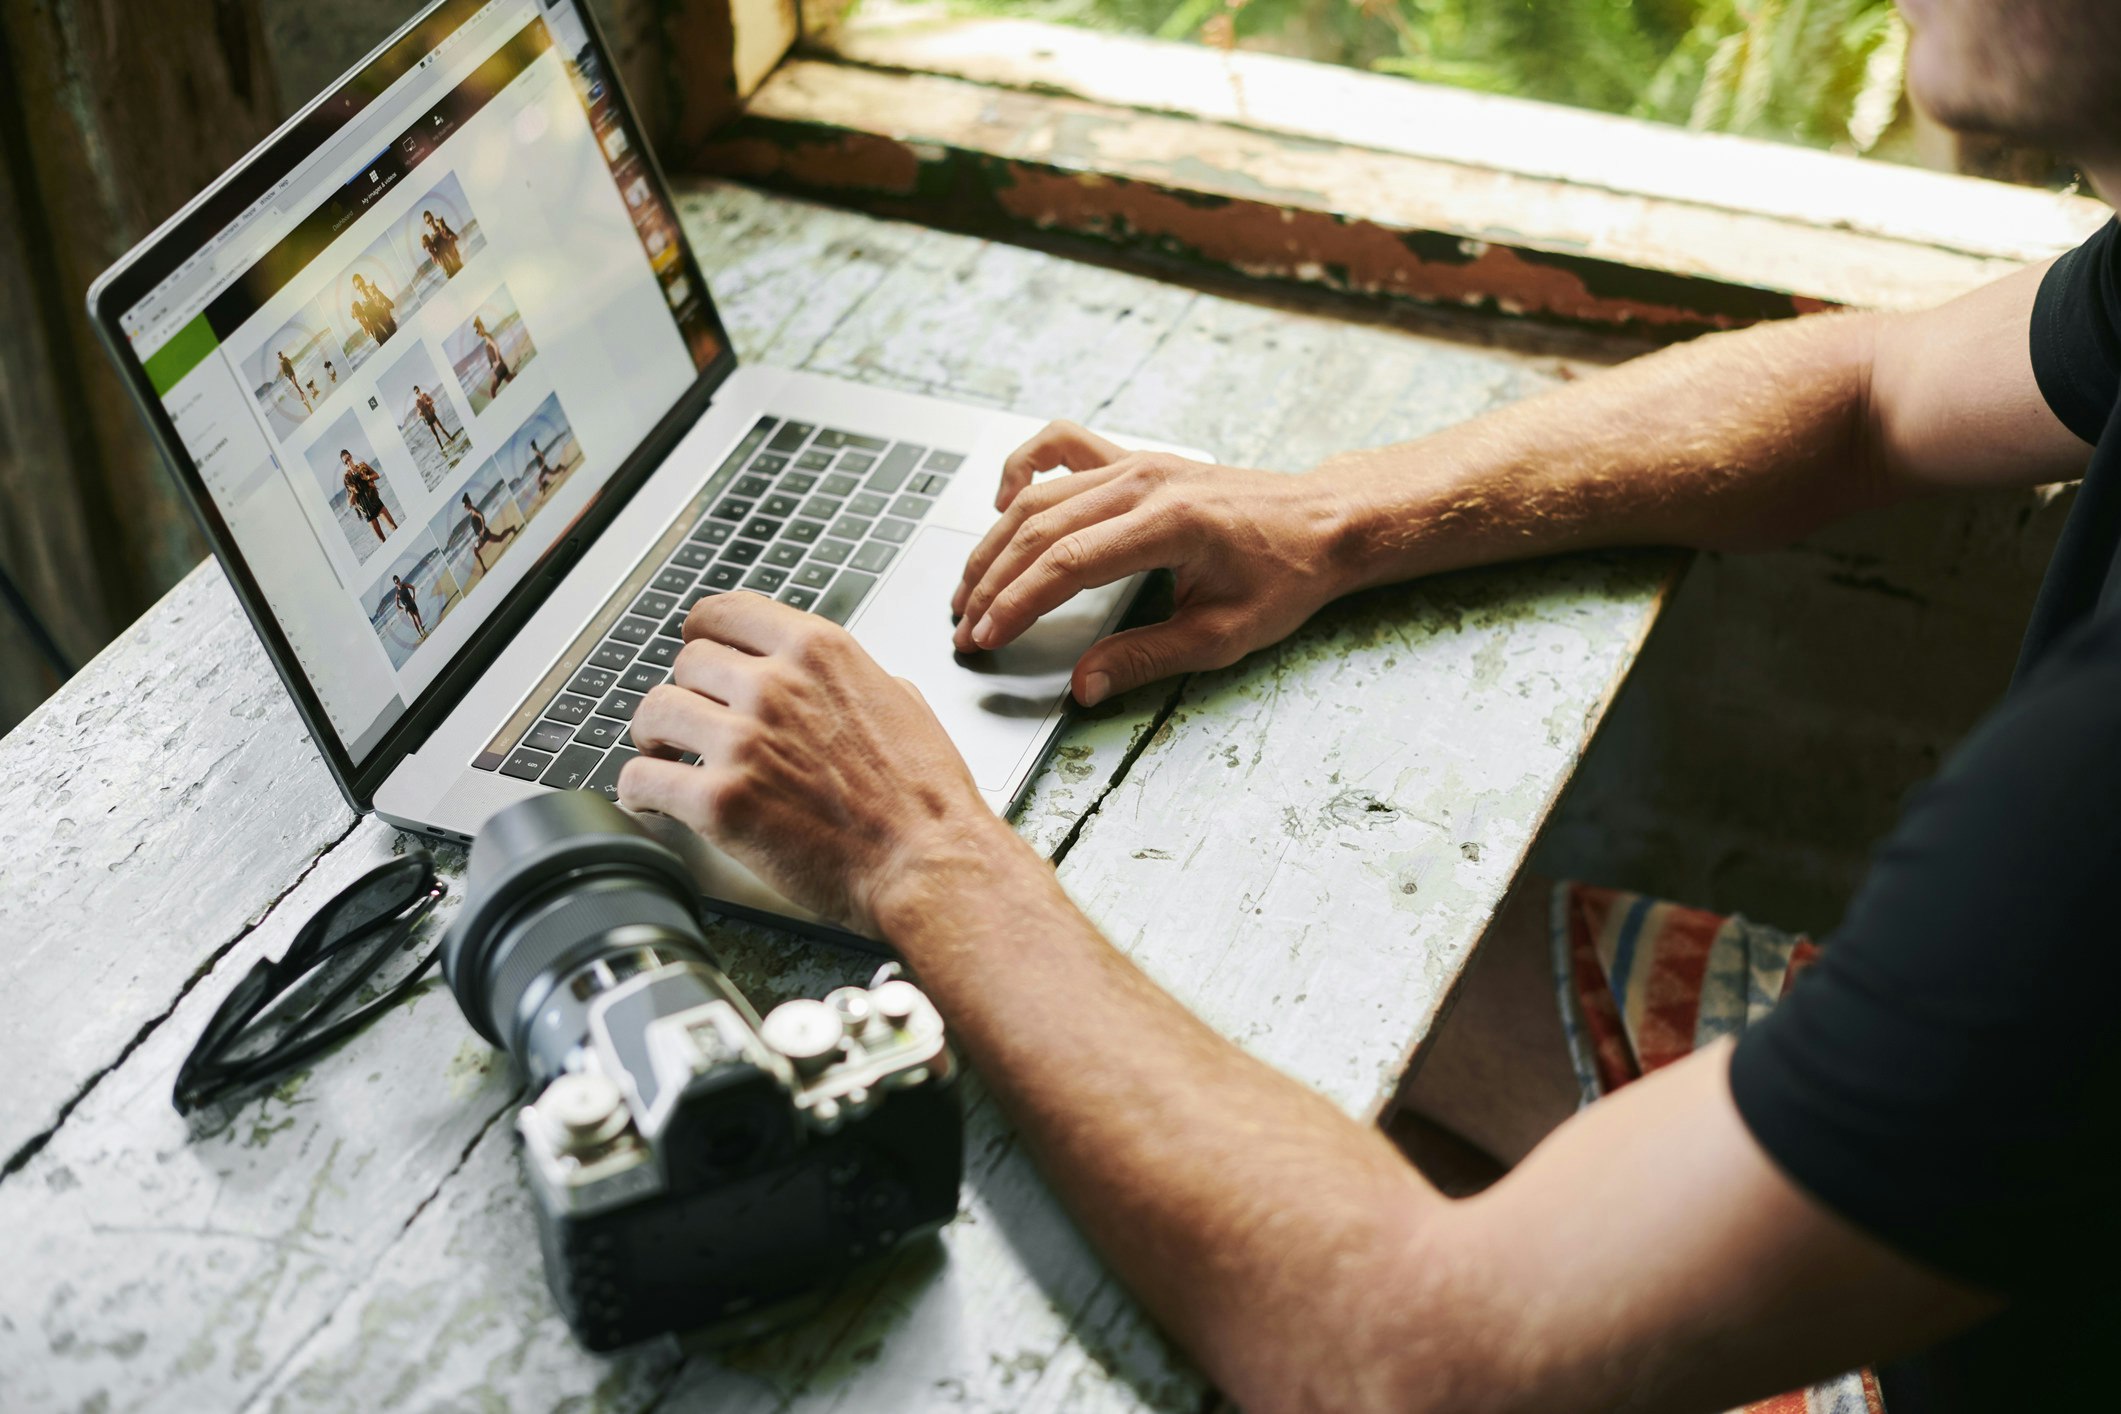 A man on a laptop is looking a at photos as his camera sits on a table next to him